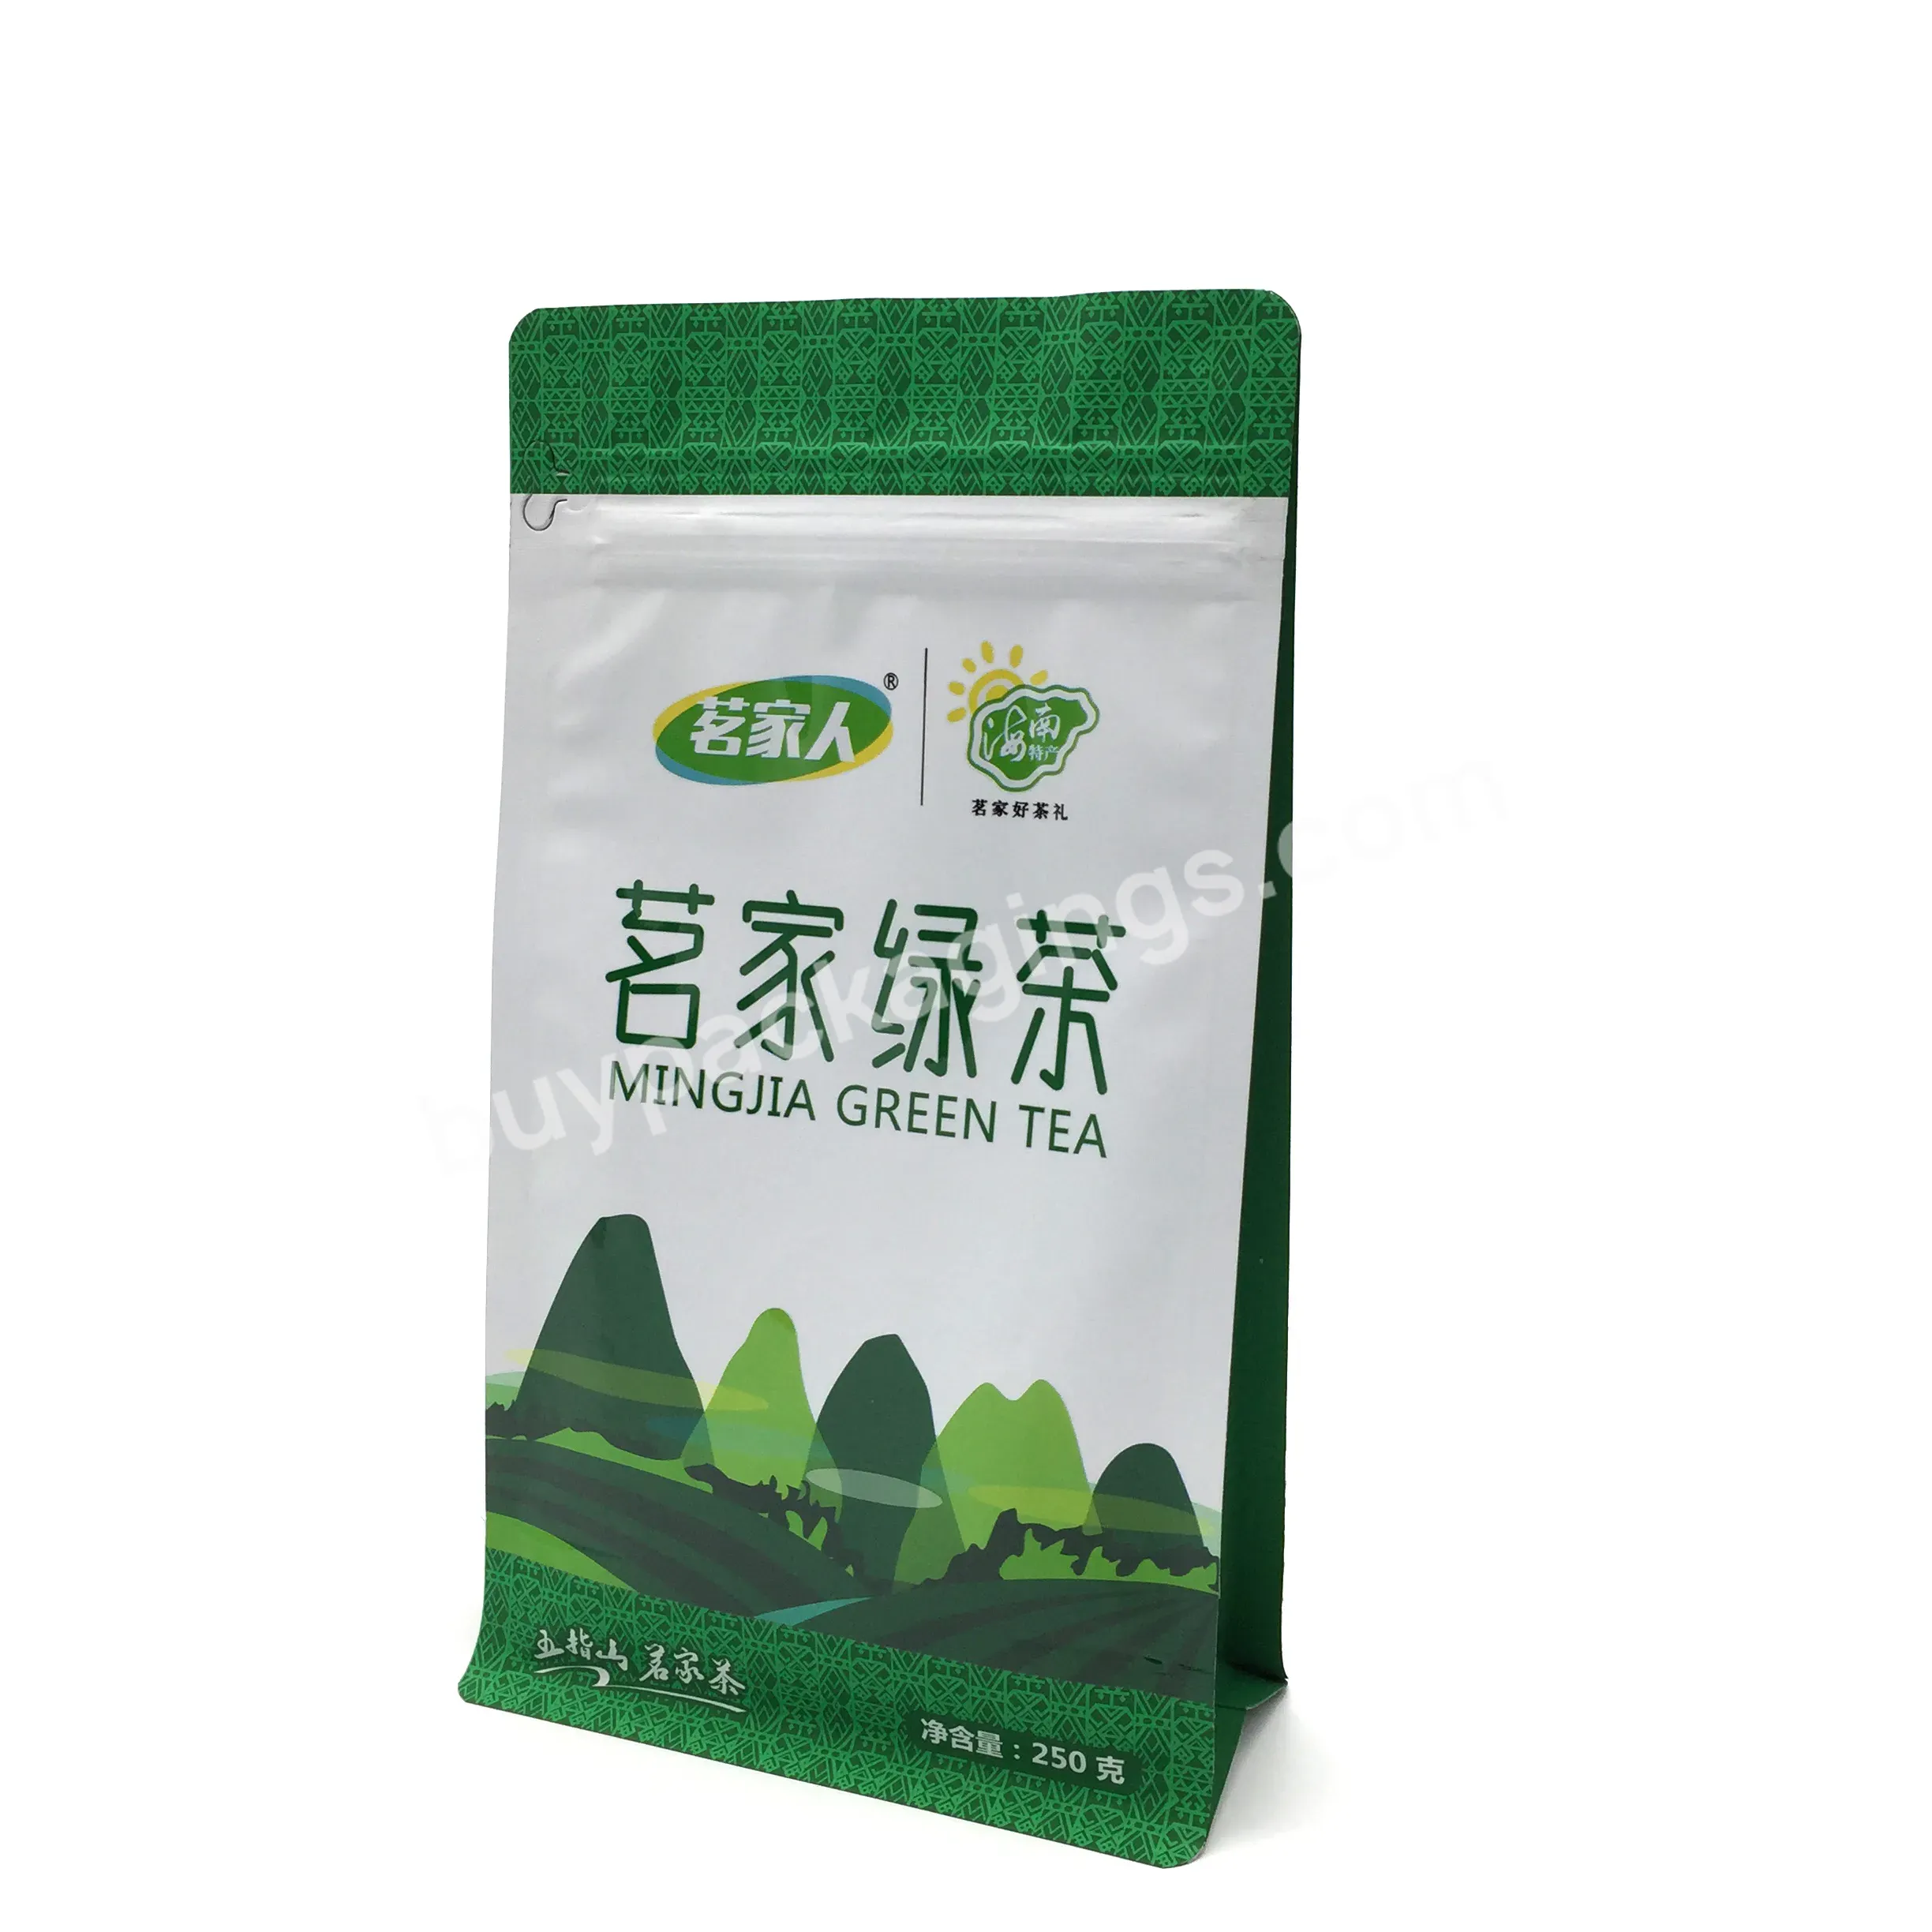 Customized Printed Zip Lock Stand Up Foil Bags Flat Bottom Pouch Zipper Snack Tea Protein Powder Bag - Buy Flat Bottom Pouch Zipper Bag,Zipper Snack Tea Protein Powder Bag,Flat Bottom Pouch Zipper Bag.